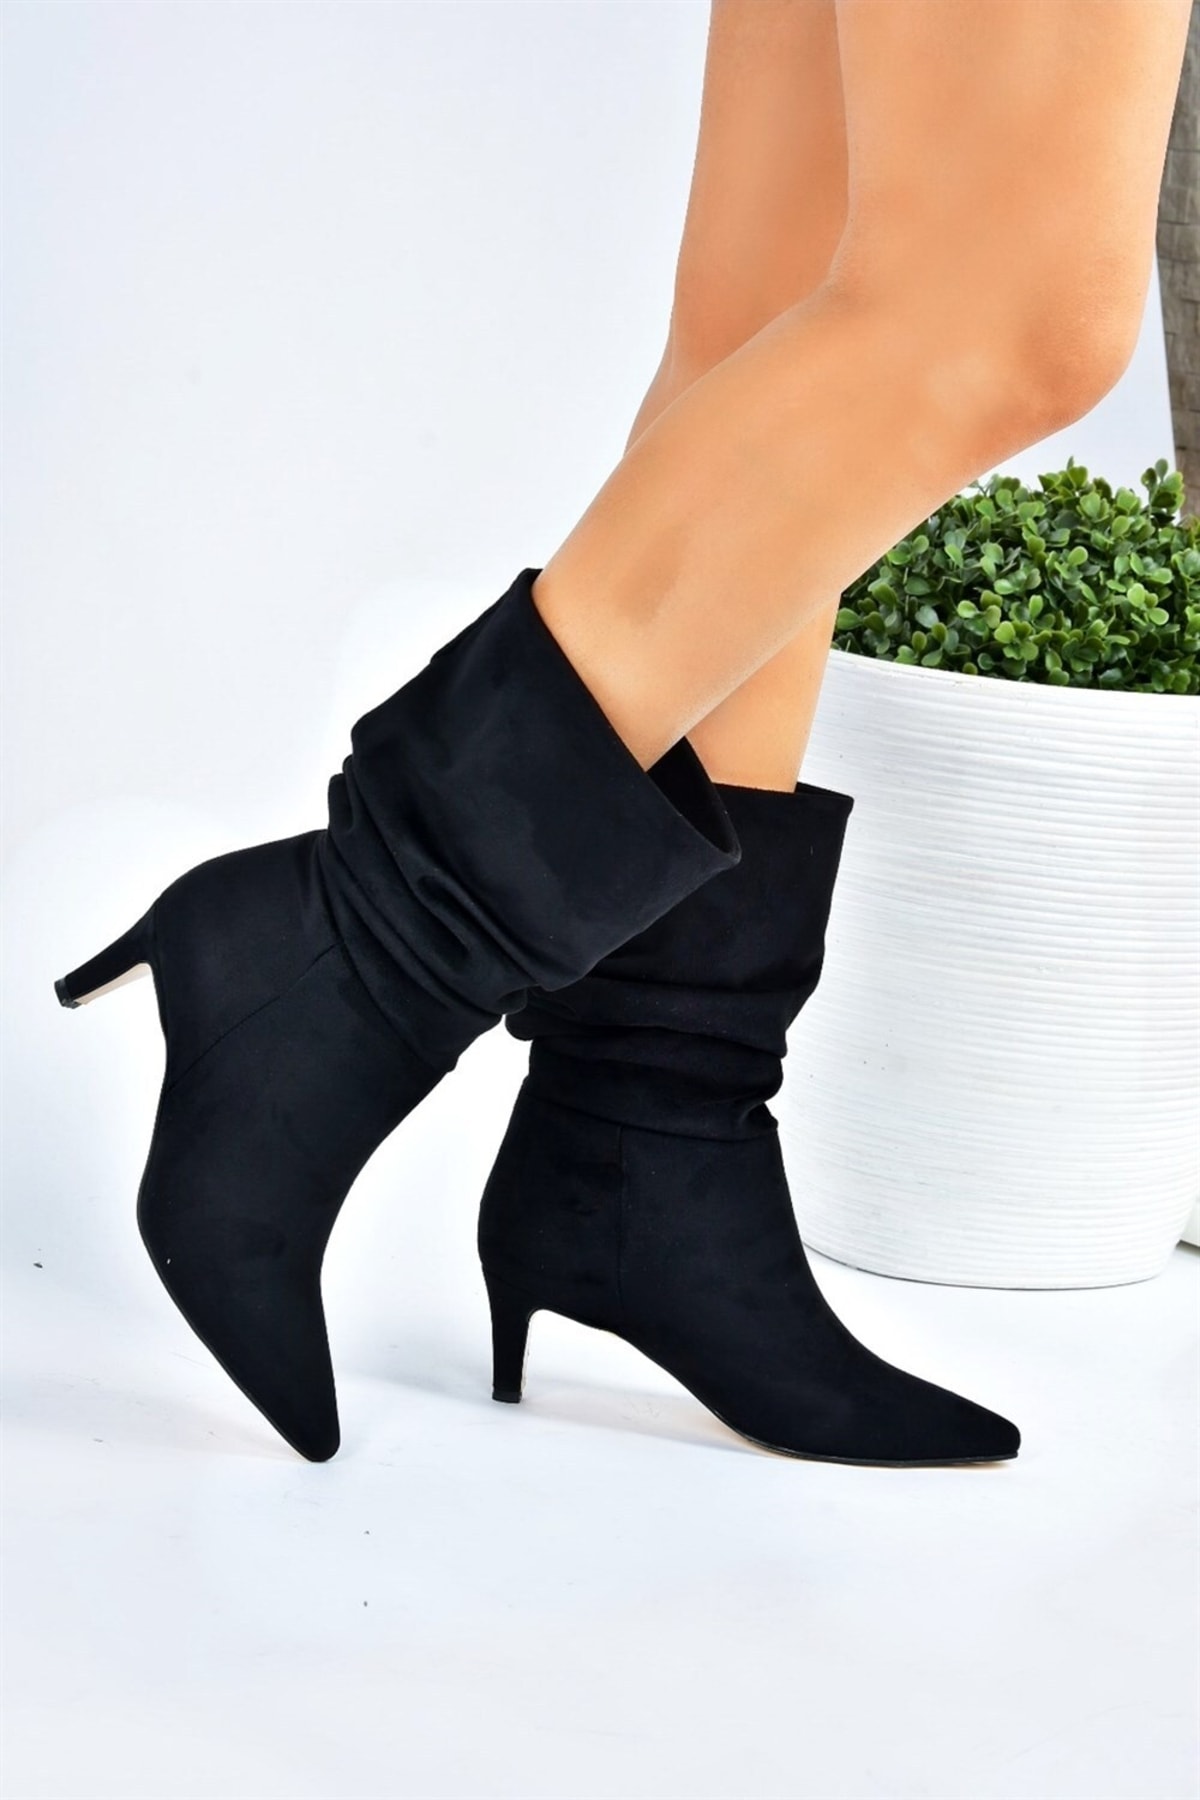 Fox Shoes Black Suede Drawstring Short Heeled Women's Boots